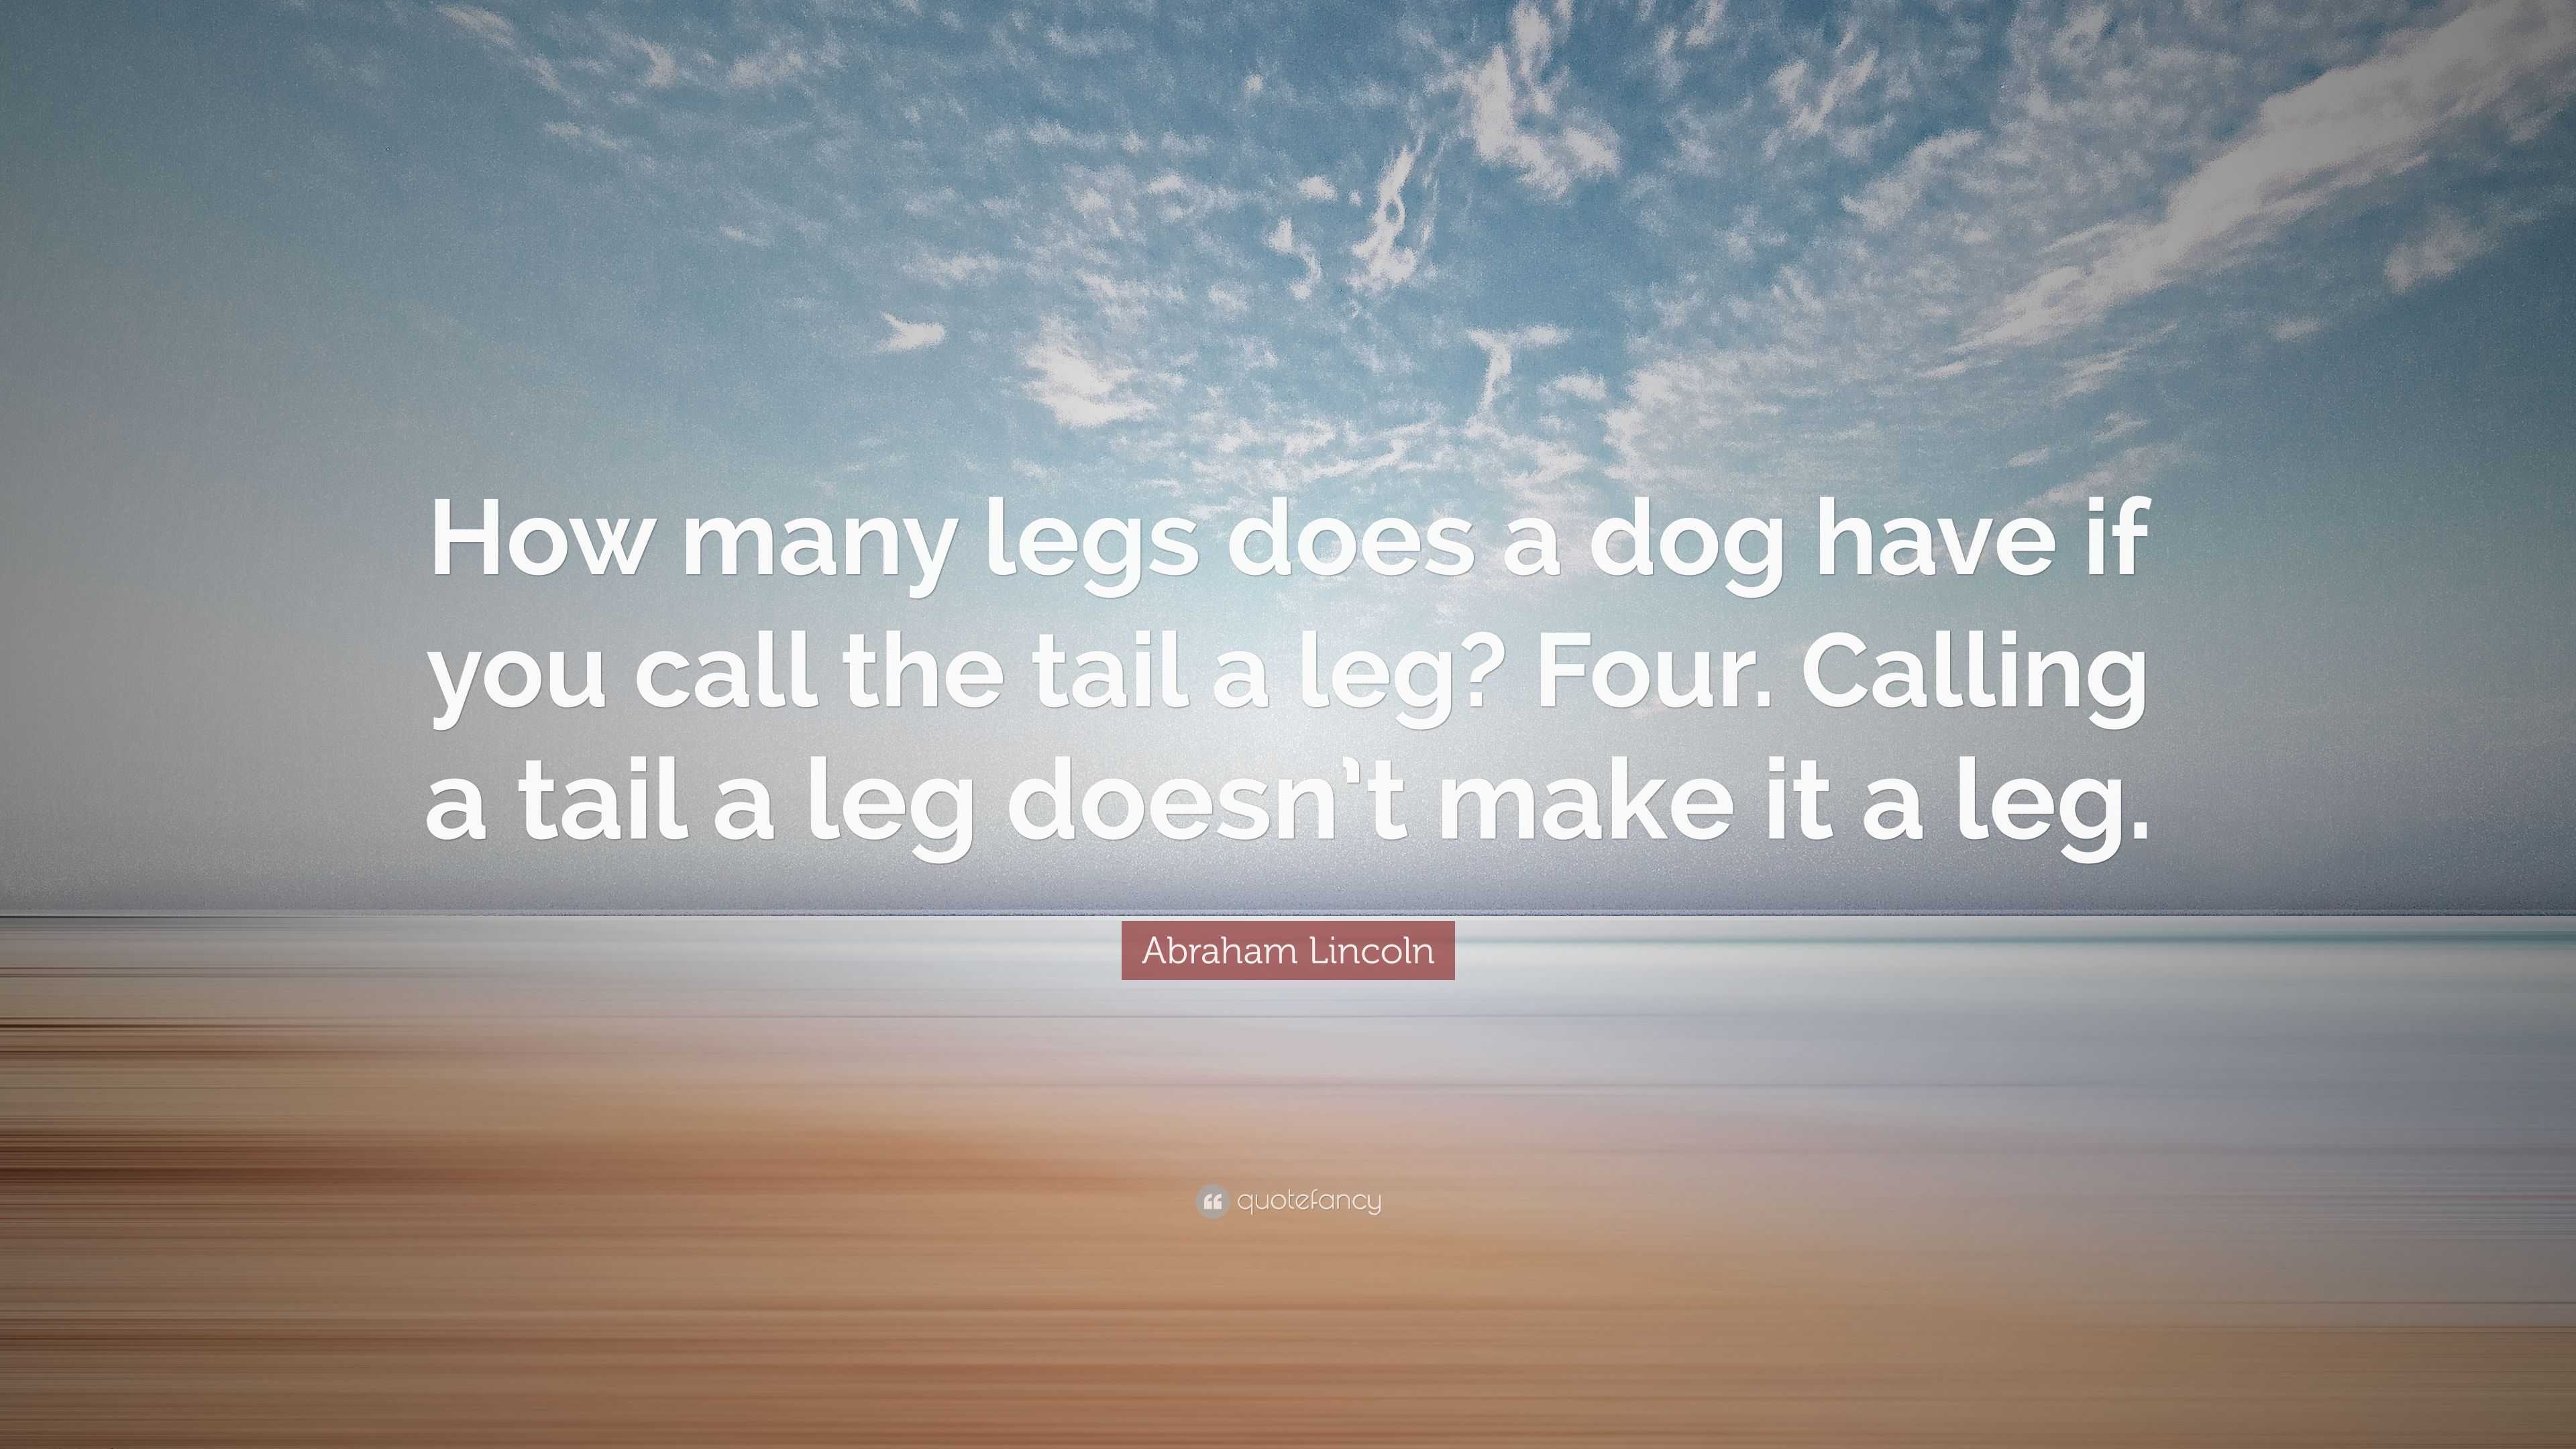 abraham-lincoln-quote-how-many-legs-does-a-dog-have-if-you-call-the